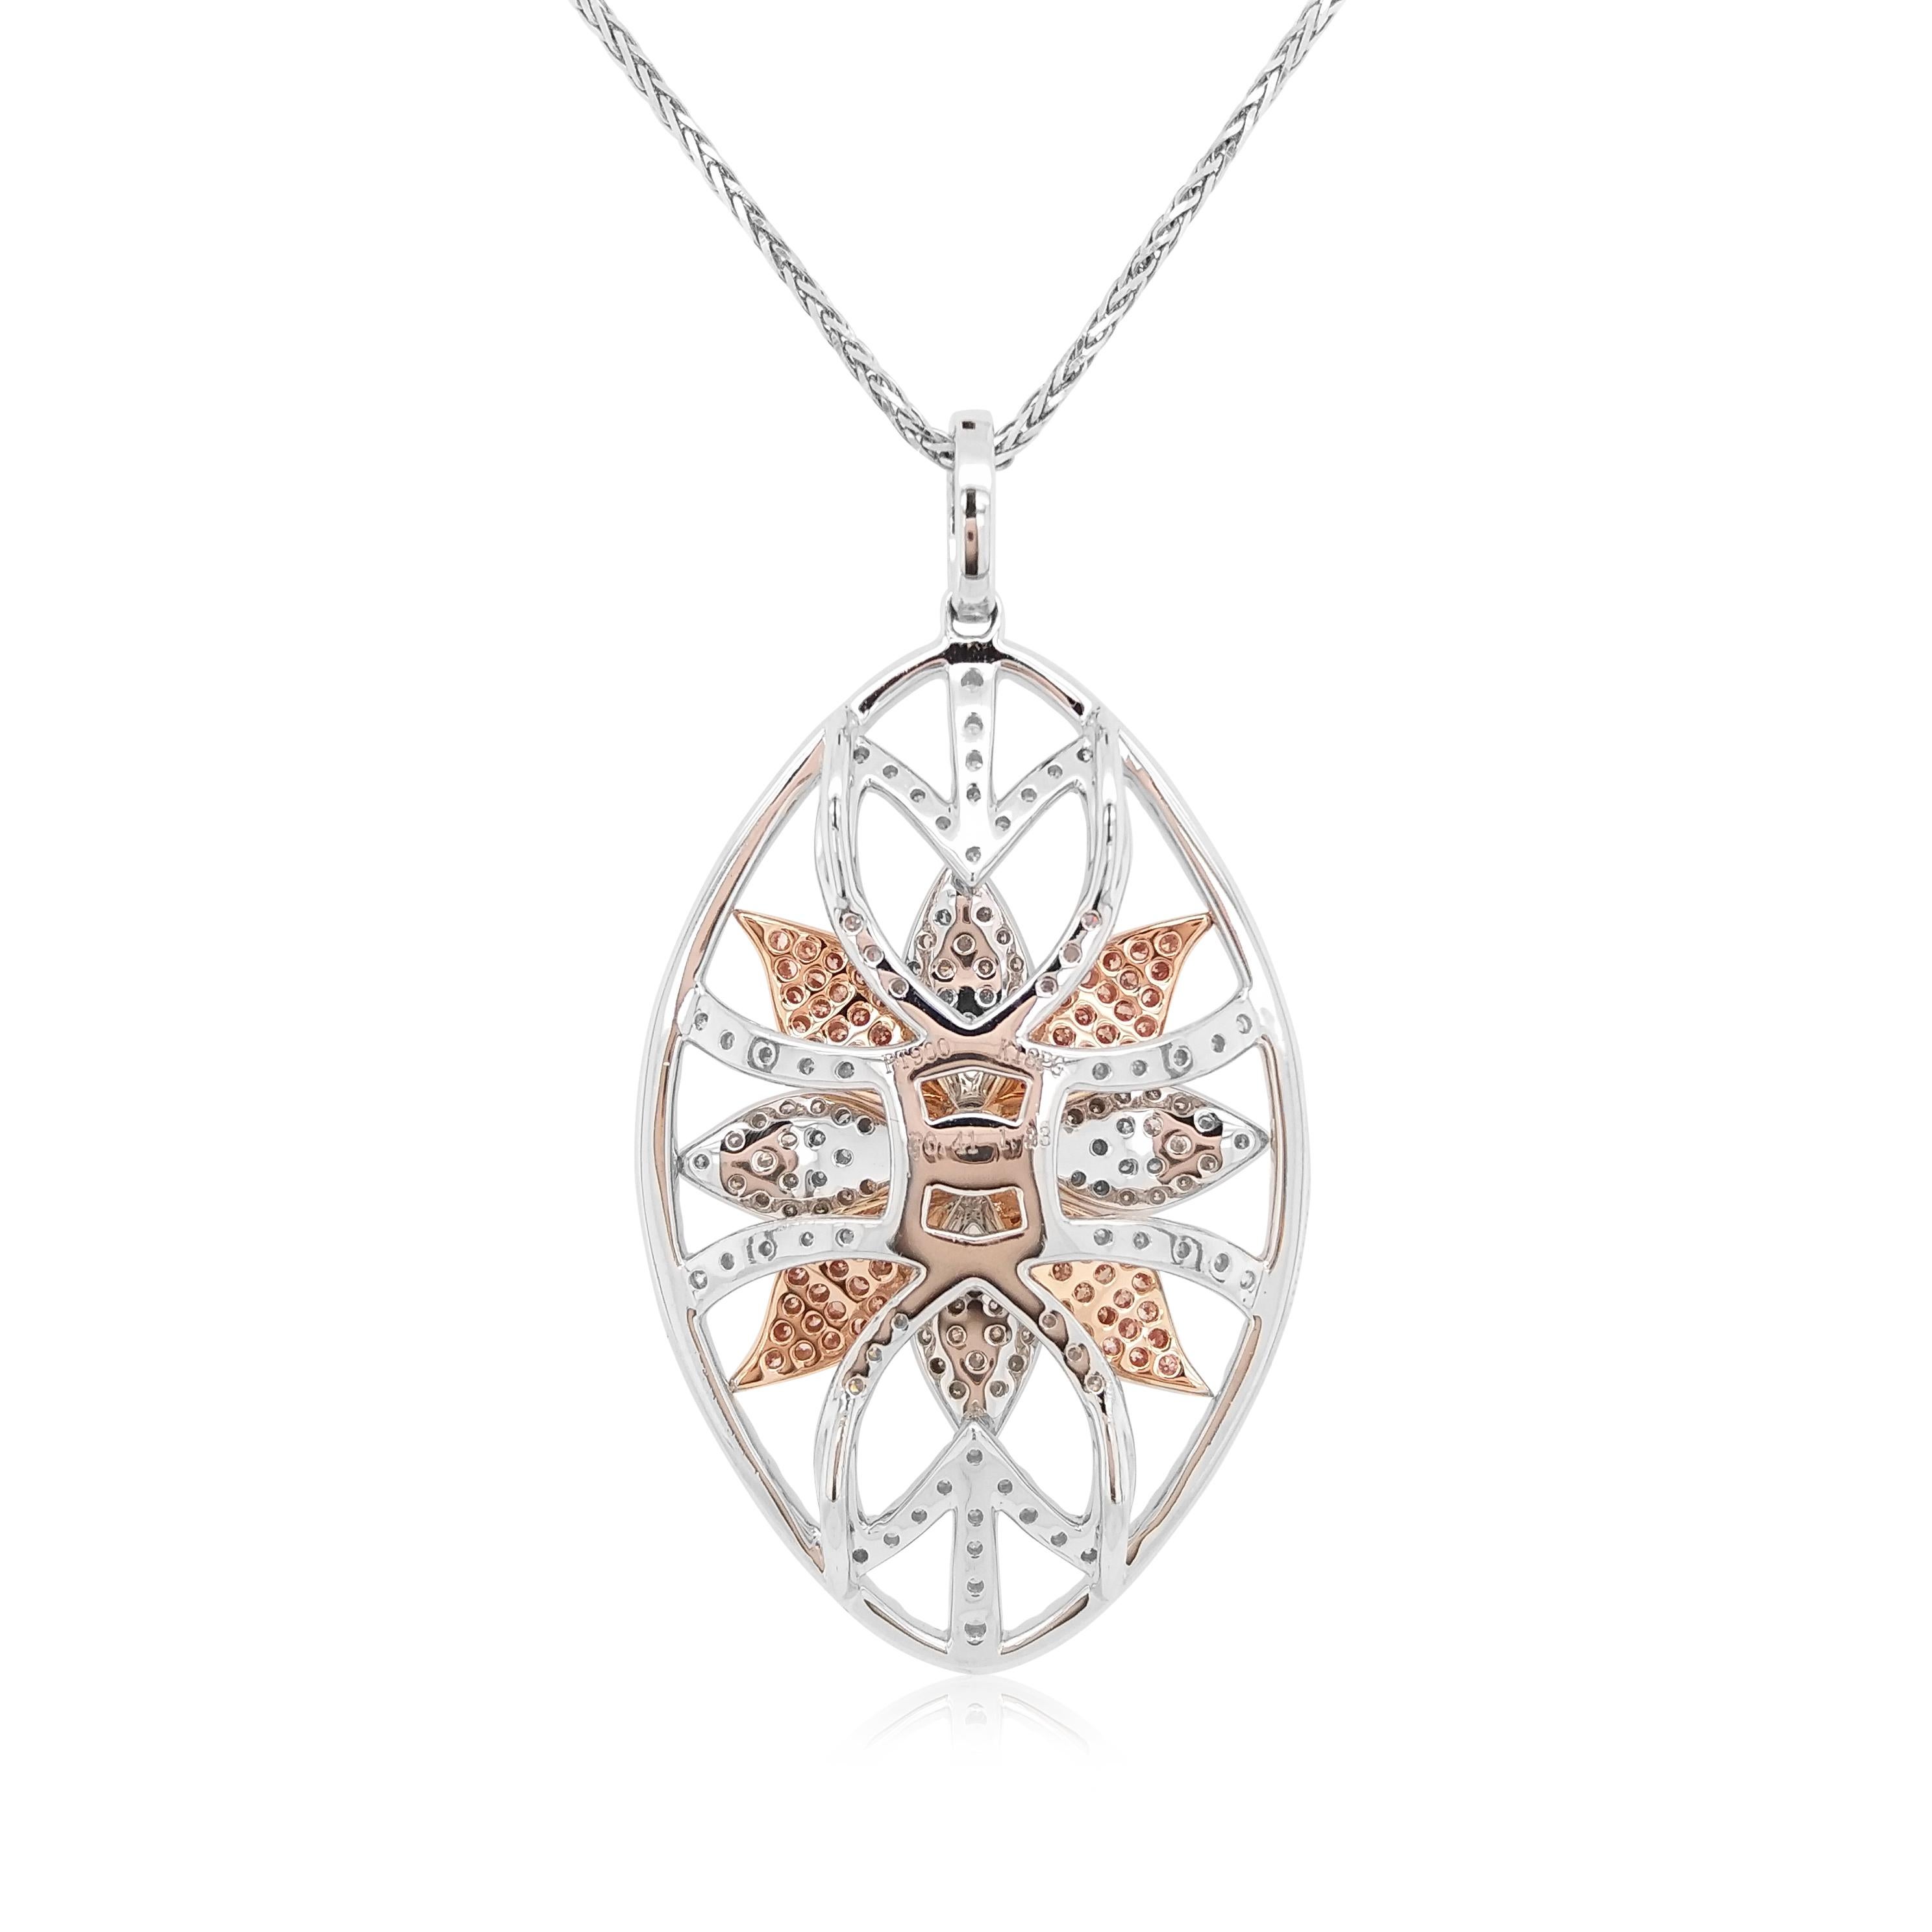 This elegant Platinum pendant features stunning natural Argyle Pink Diamonds and sparkling White Diamonds in a floral-style motif. Easy to wear with any type of outfit, this daily-use pendant will add a touch of glamour to everything it is combined